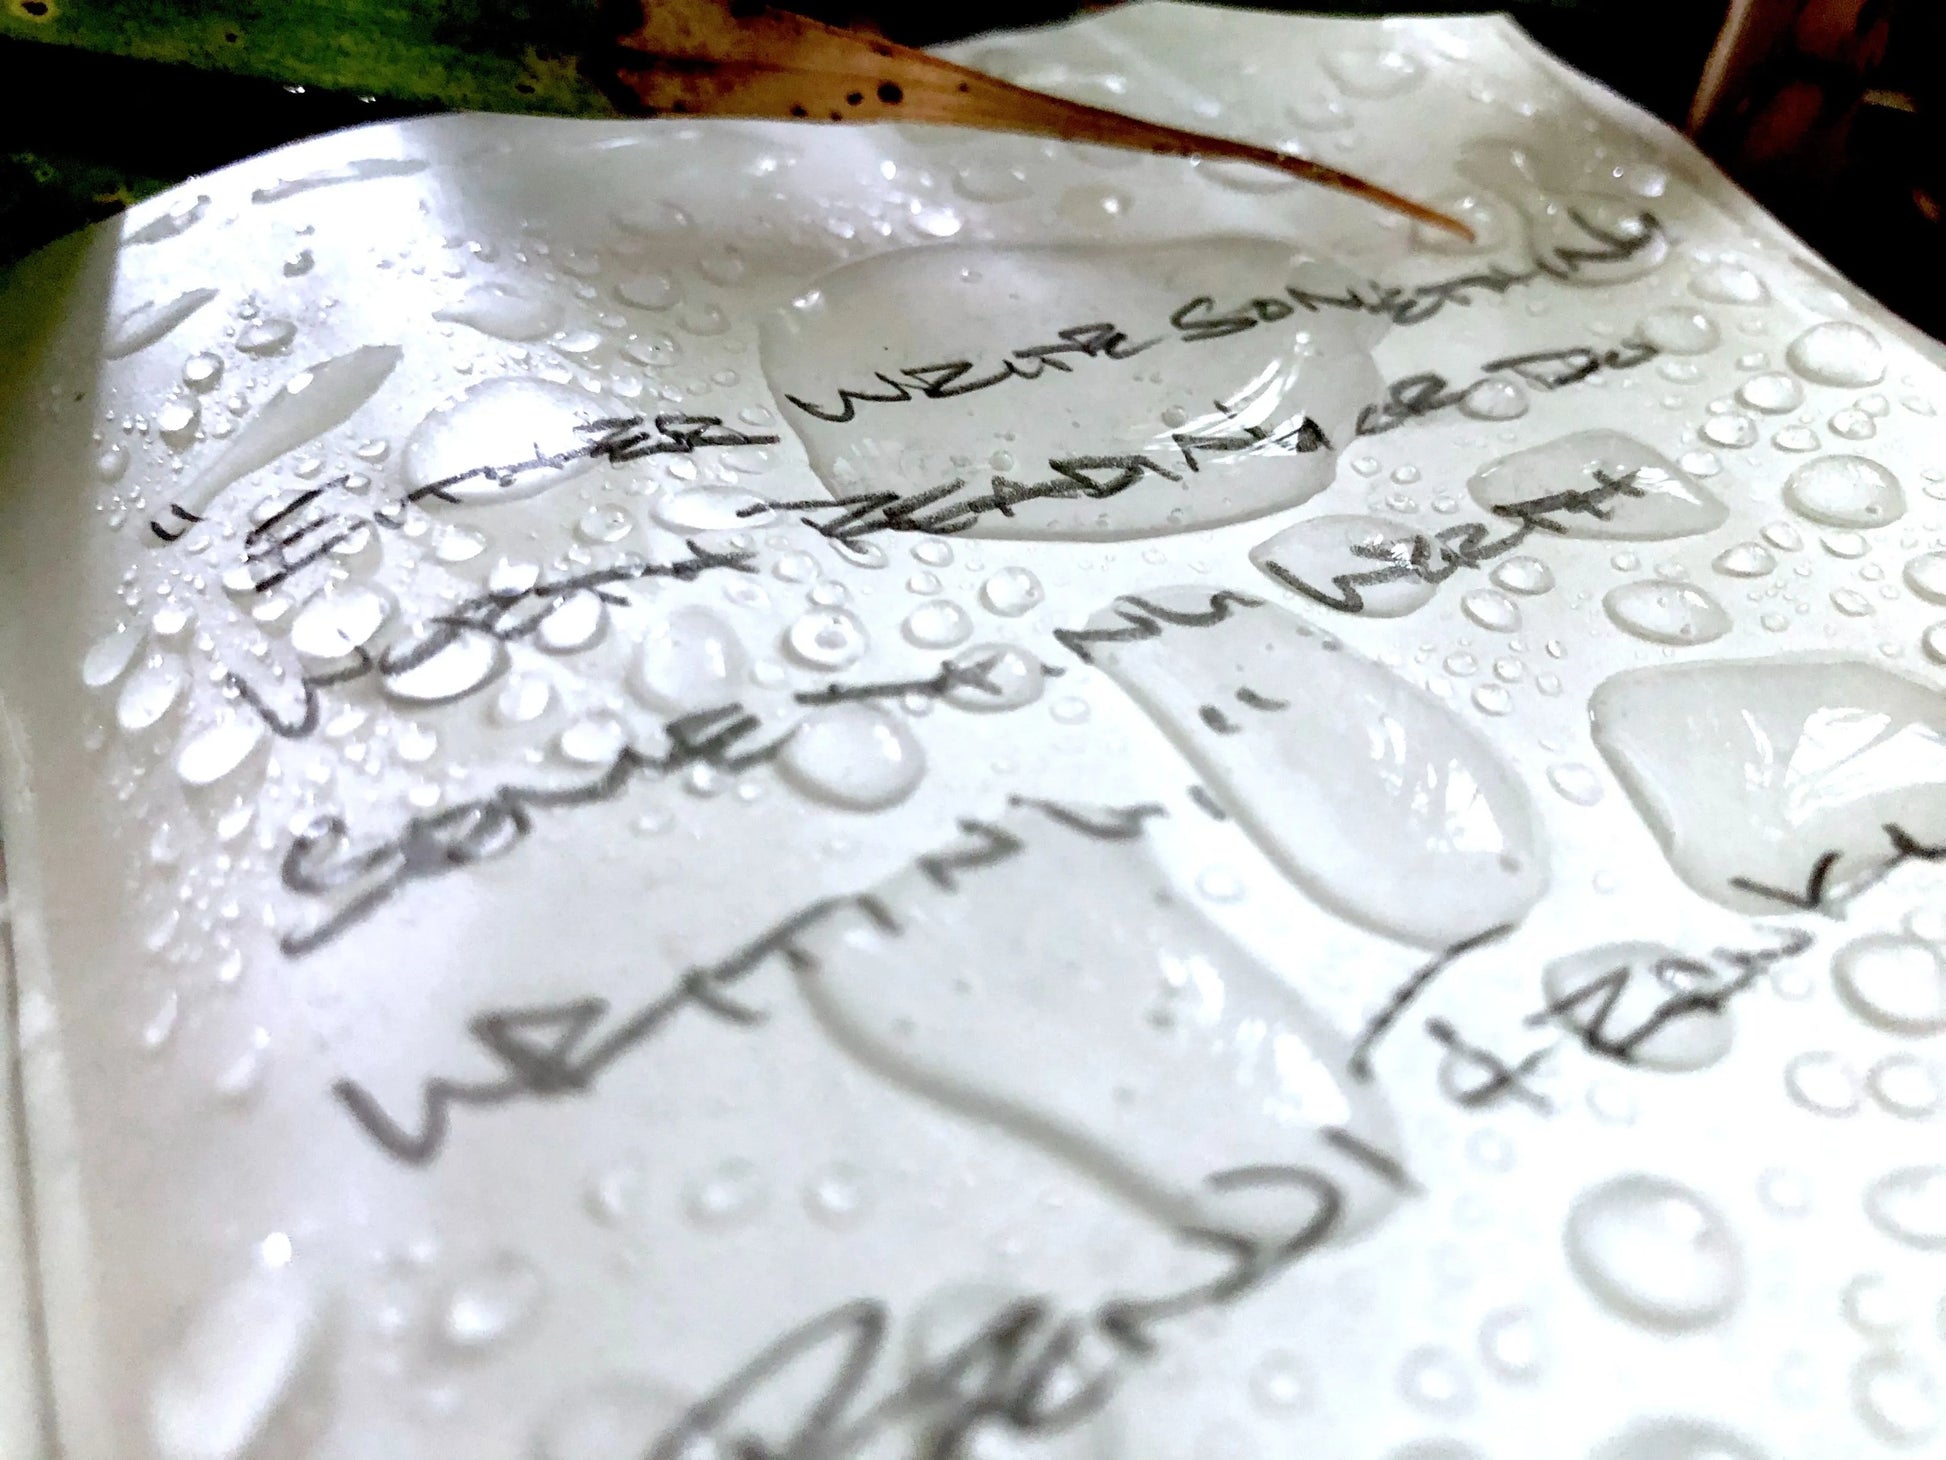 Notepad paper with writing and water on it.